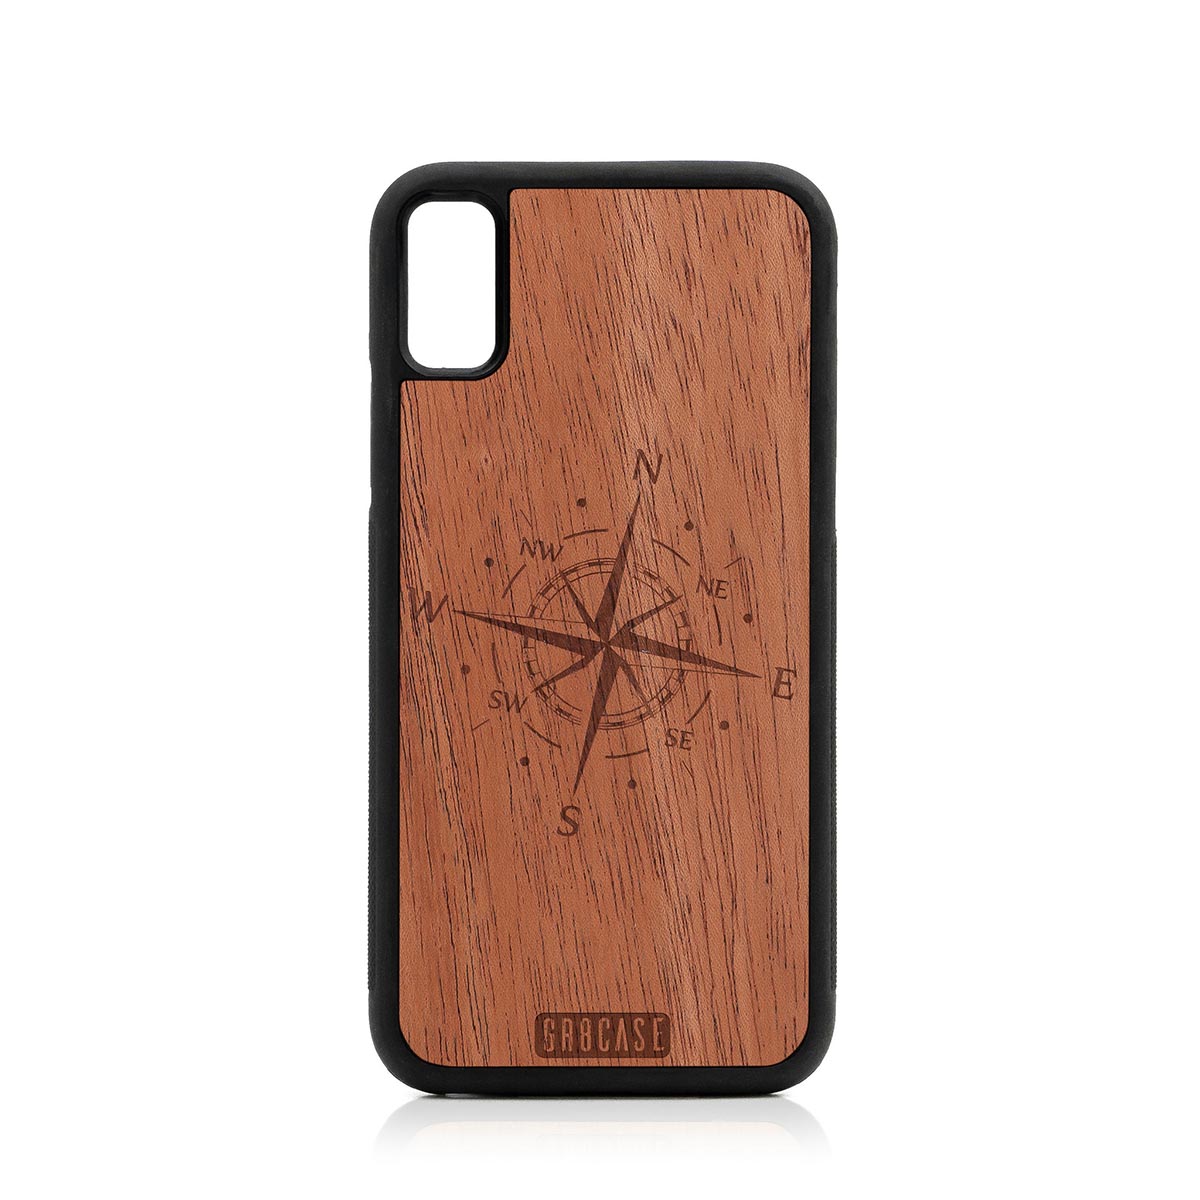 Compass Design Wood Case For iPhone X/XS by GR8CASE